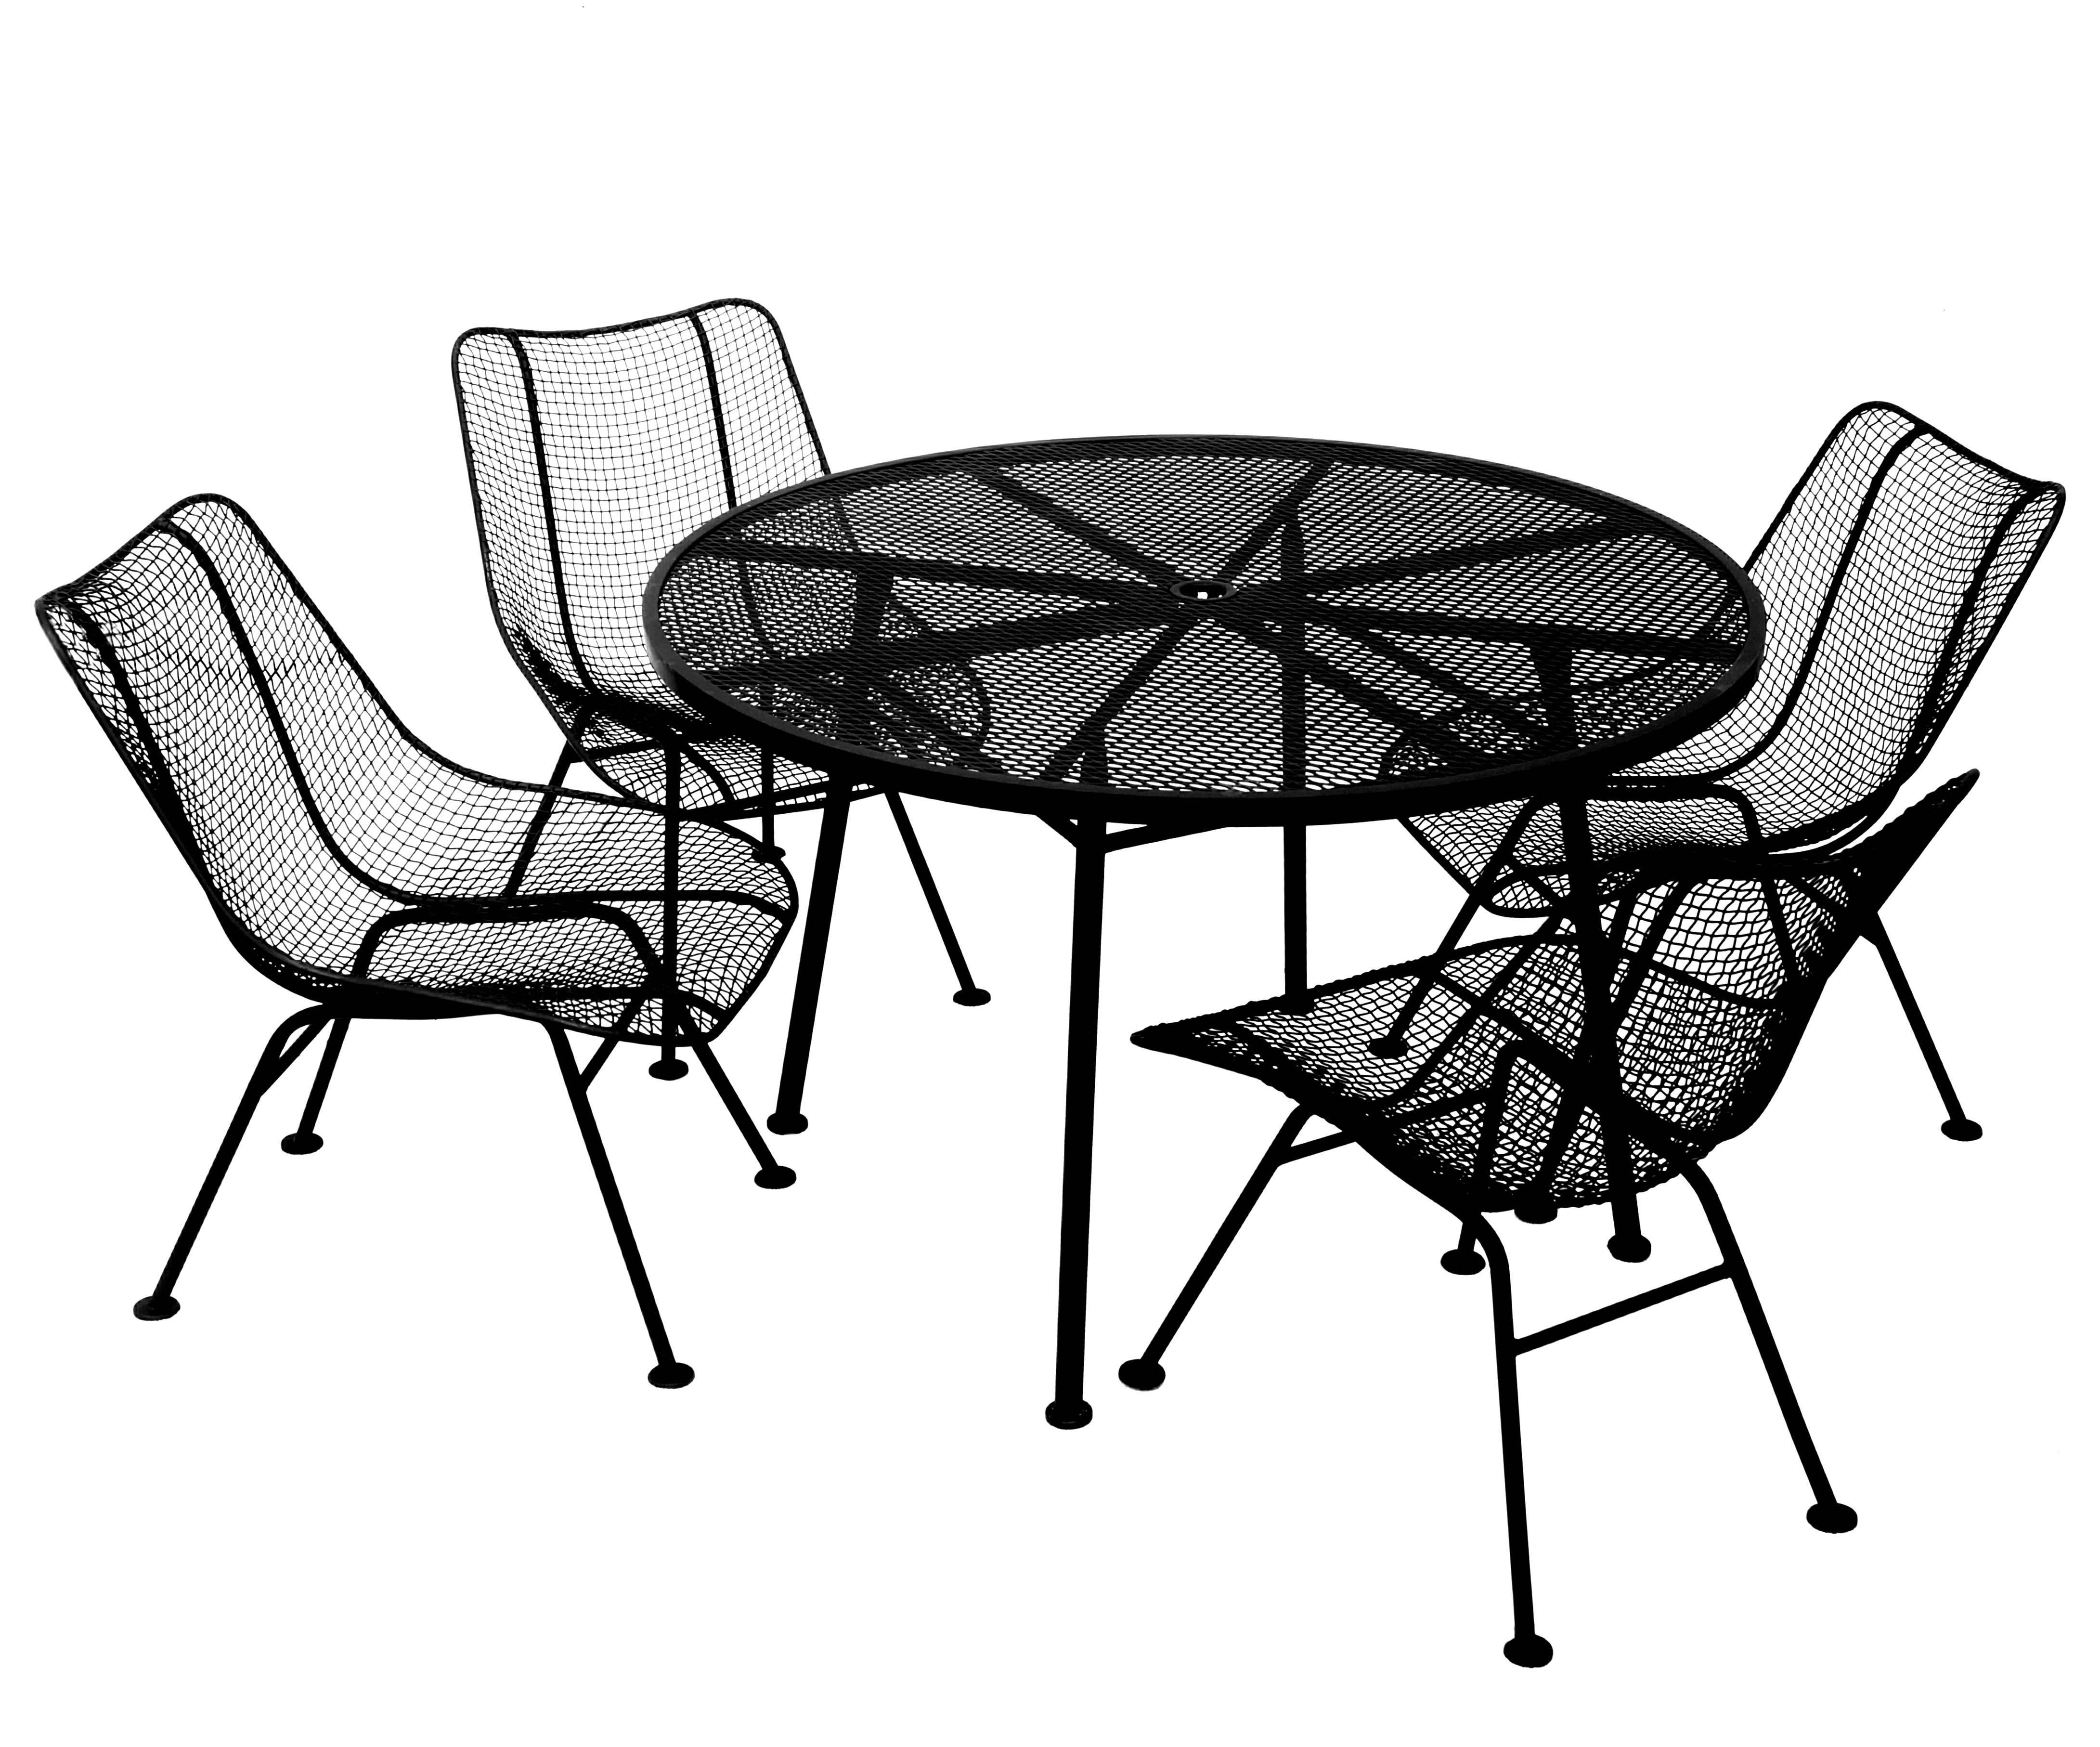 Russell Woodard sculptura outdoor indoor patio dining set table and four chairs. The table measures 41.50